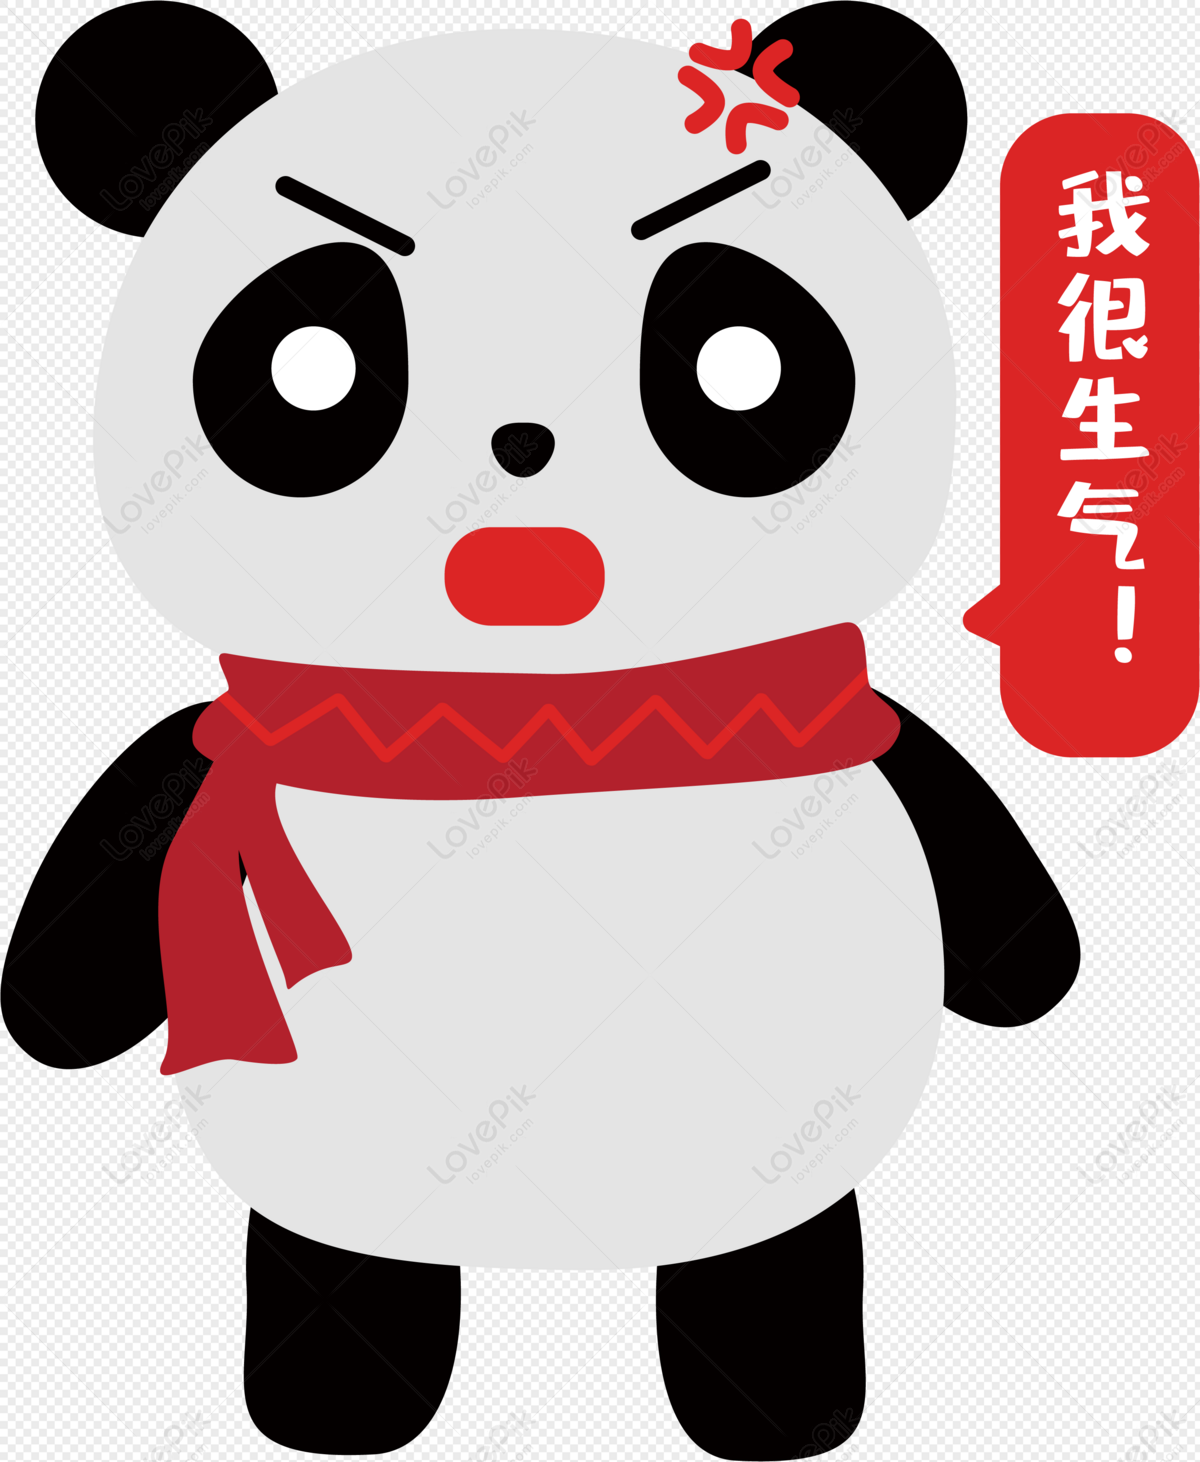 Angry Panda PNG Free Download And Clipart Image For Free Download - Lovepik  | 400964773